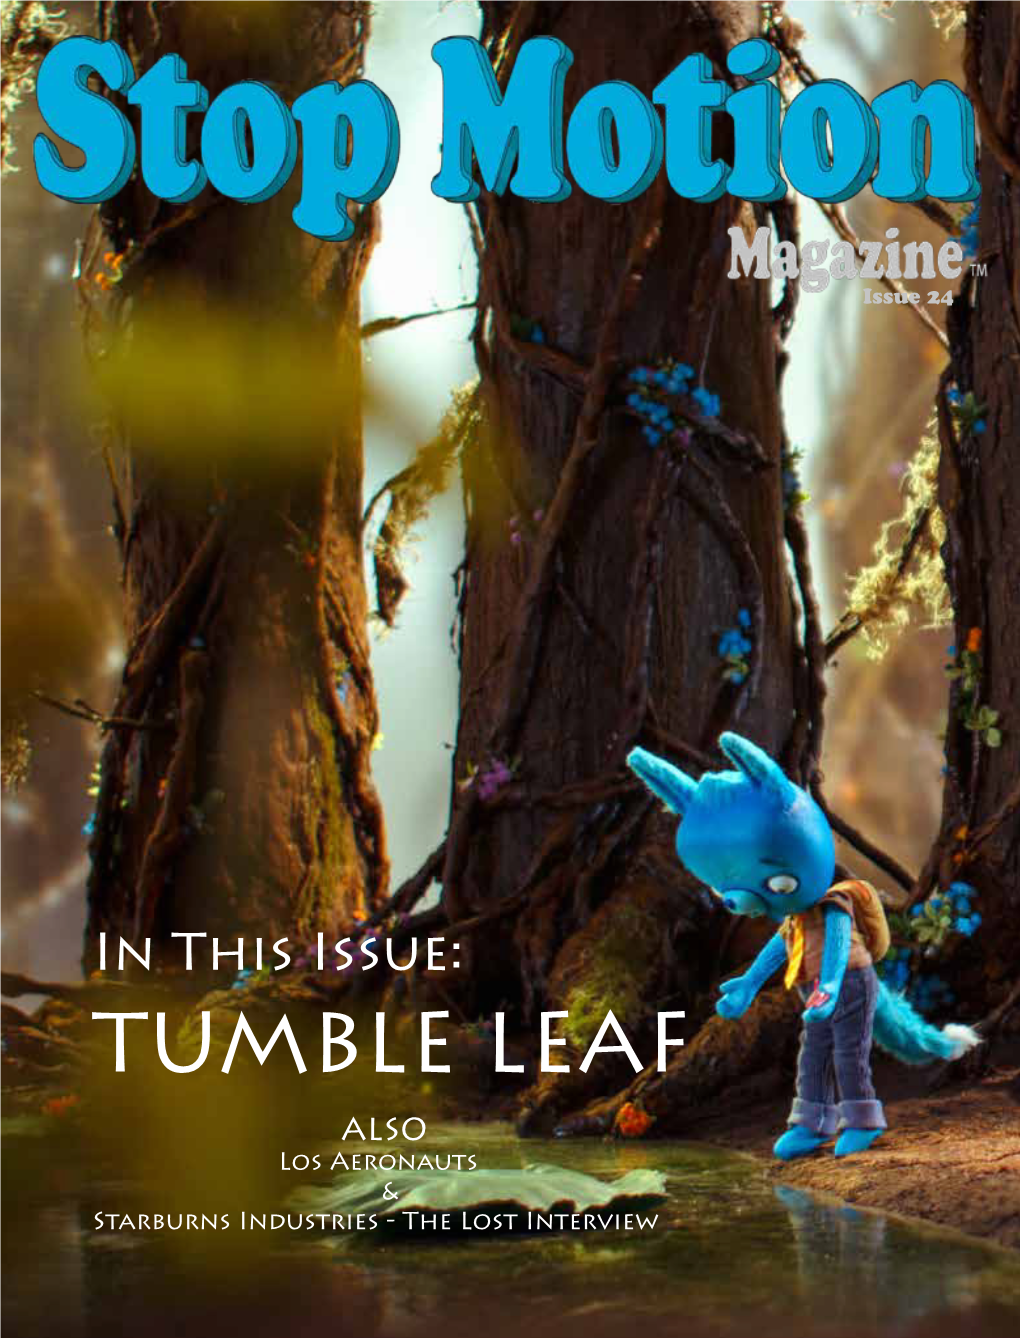 In This Issue: TUMBLE LEAF ALSO Los Aeronauts & Starburns Industries - the Lost Interview